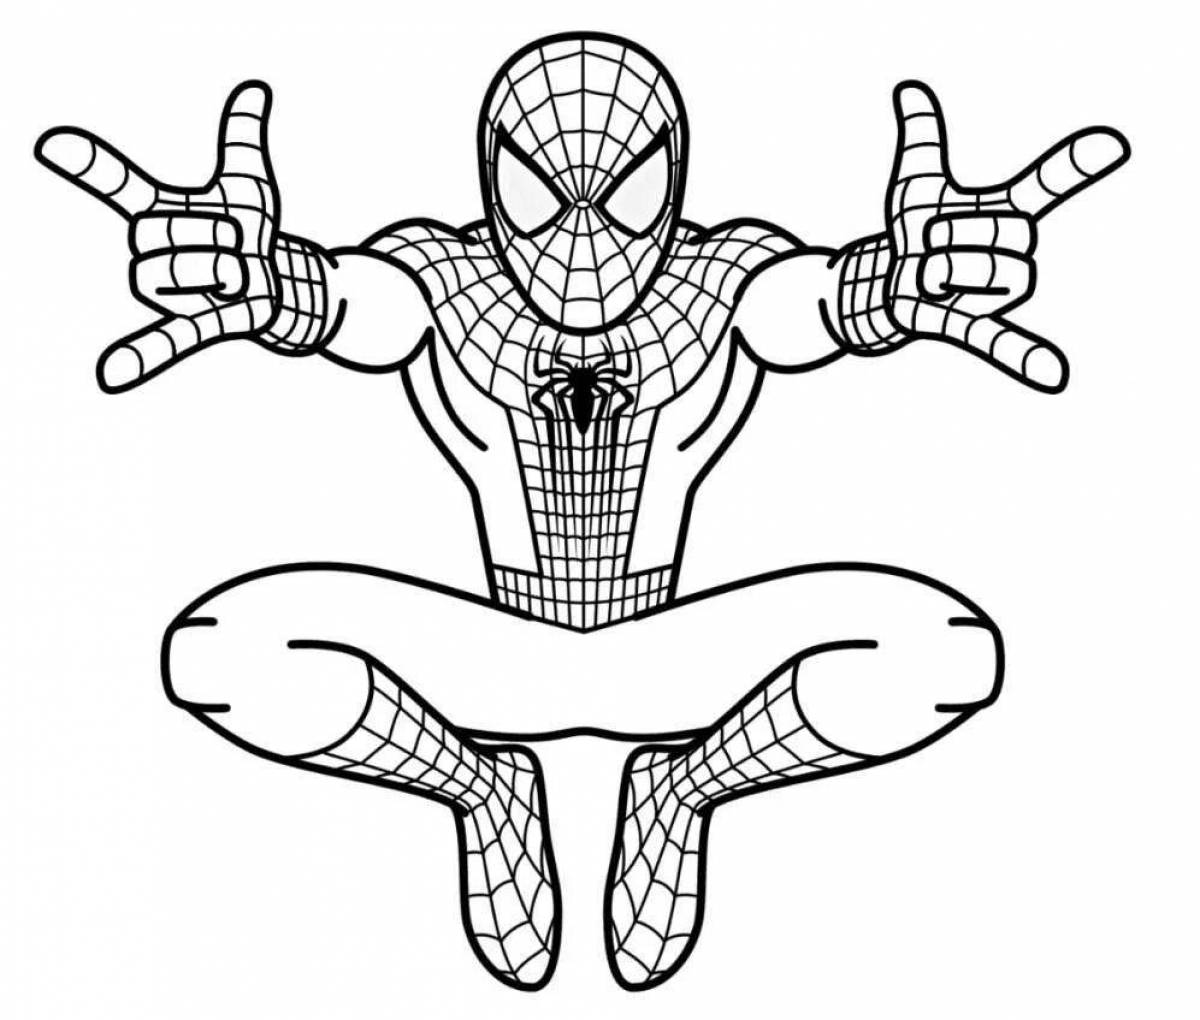 Fun coloring book of Spiderman for the little ones